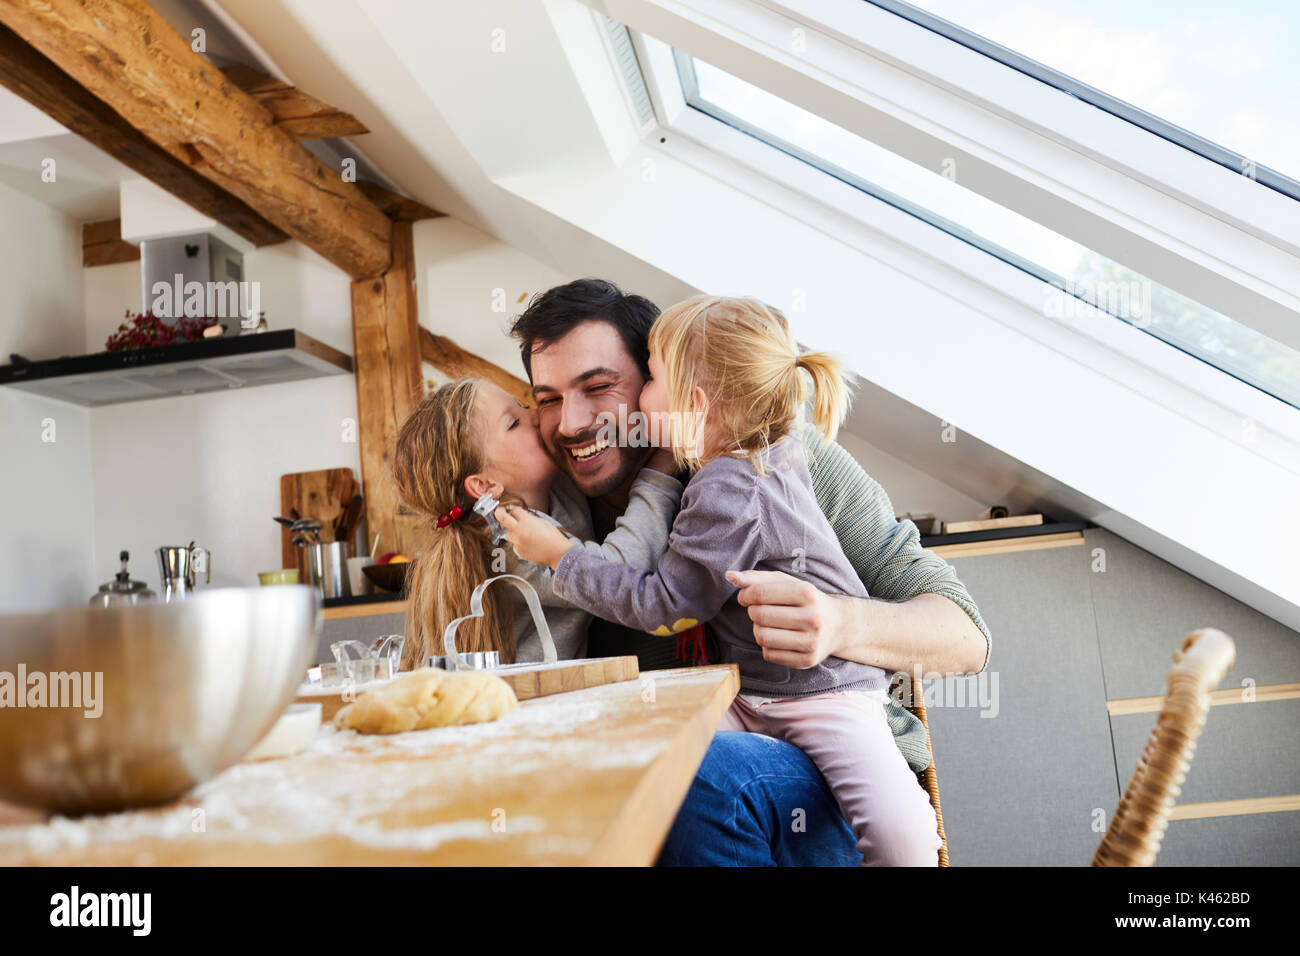 Family baking christmas cookies, father and daughters having fun, kiss on the cheeks, Portrait, Stock Photo